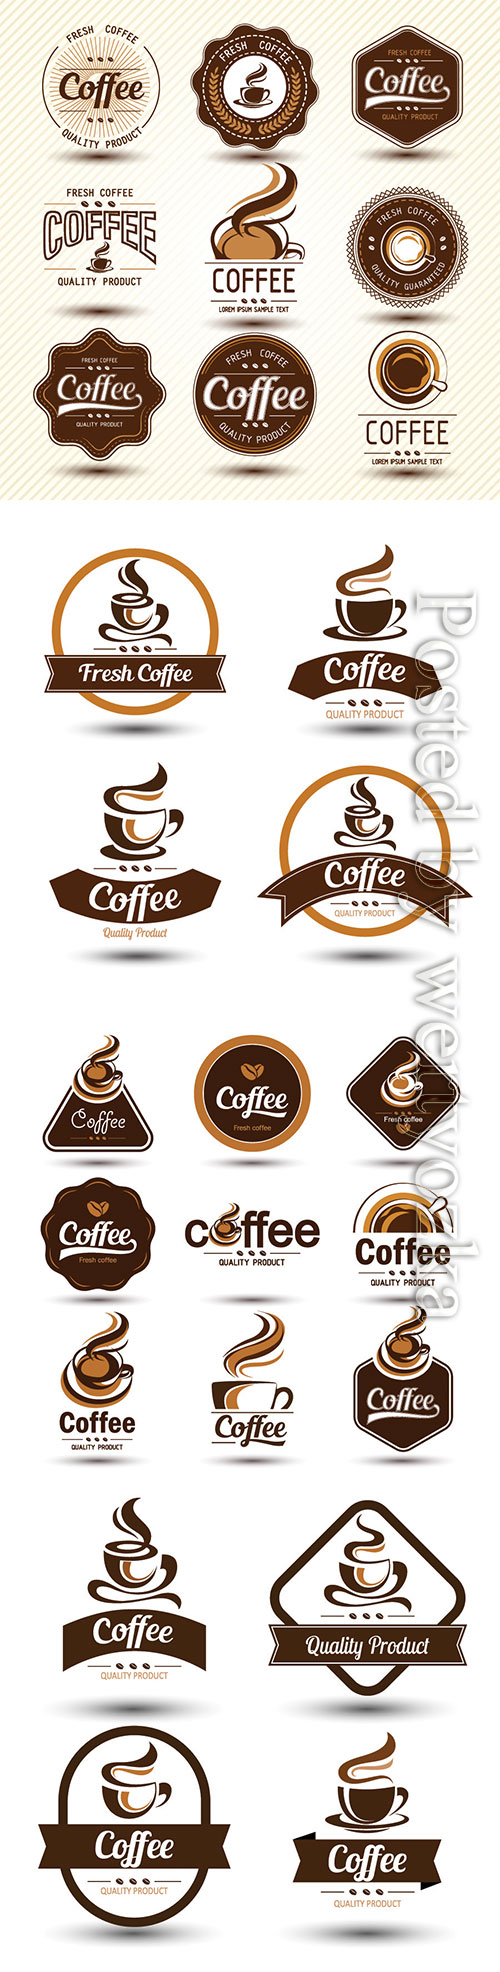 Coffee label collection vector illustration